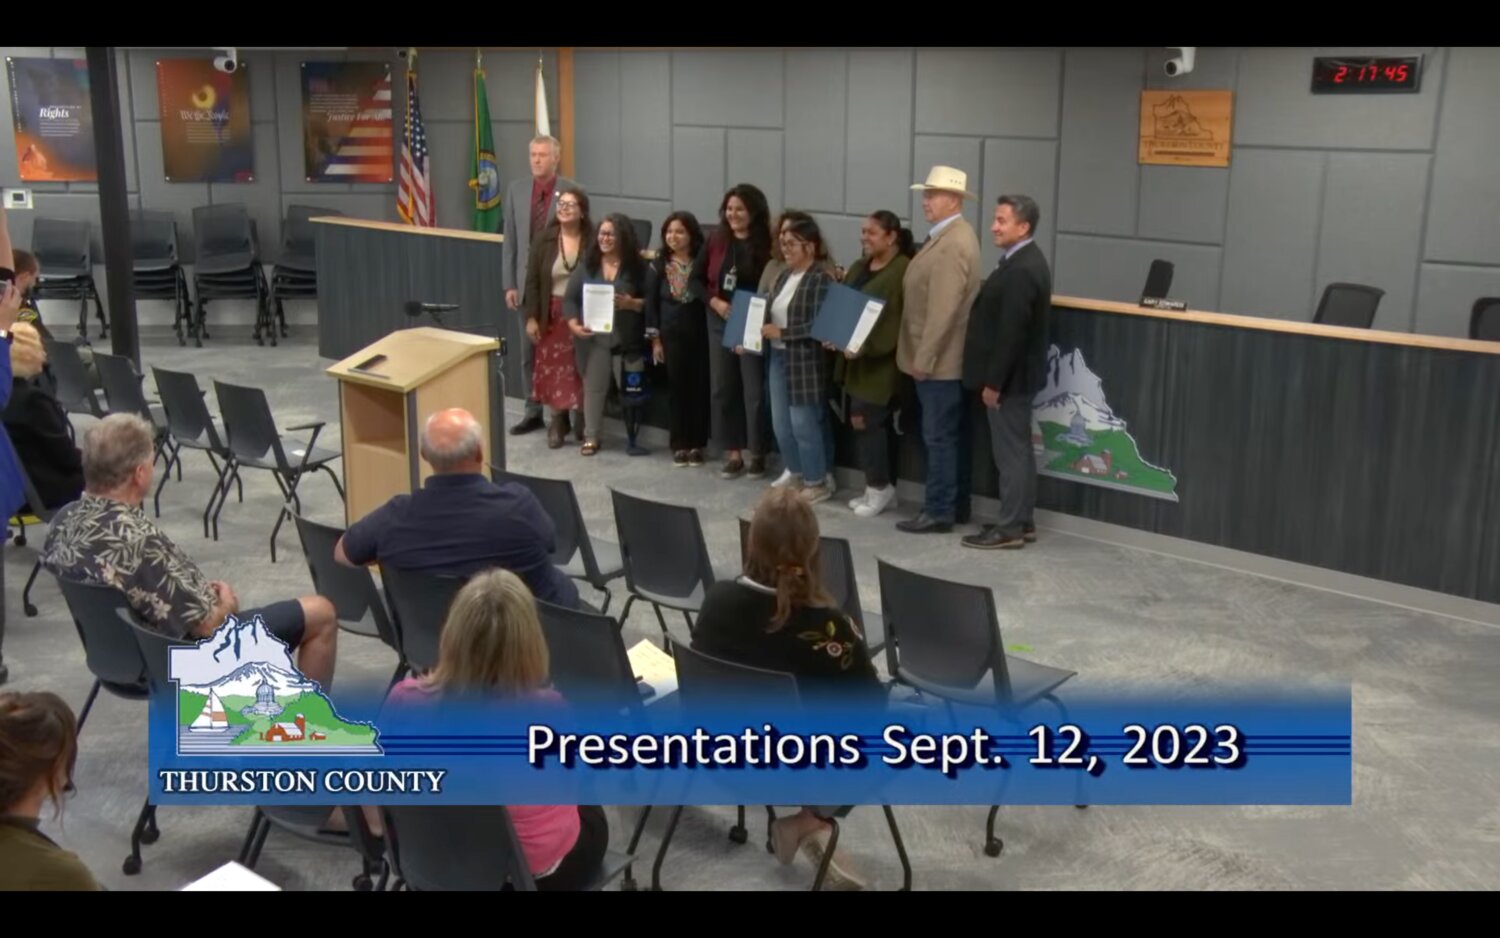 The County Commissioners posed for a photo with the Hispanic public servants from the Washington State Commission on Hispanic Affairs, Centro Integral Educativo Latino de Olympia, and Hispanic Roundtable of South Sound for the Hispanic and Latino Heritage proclamation.